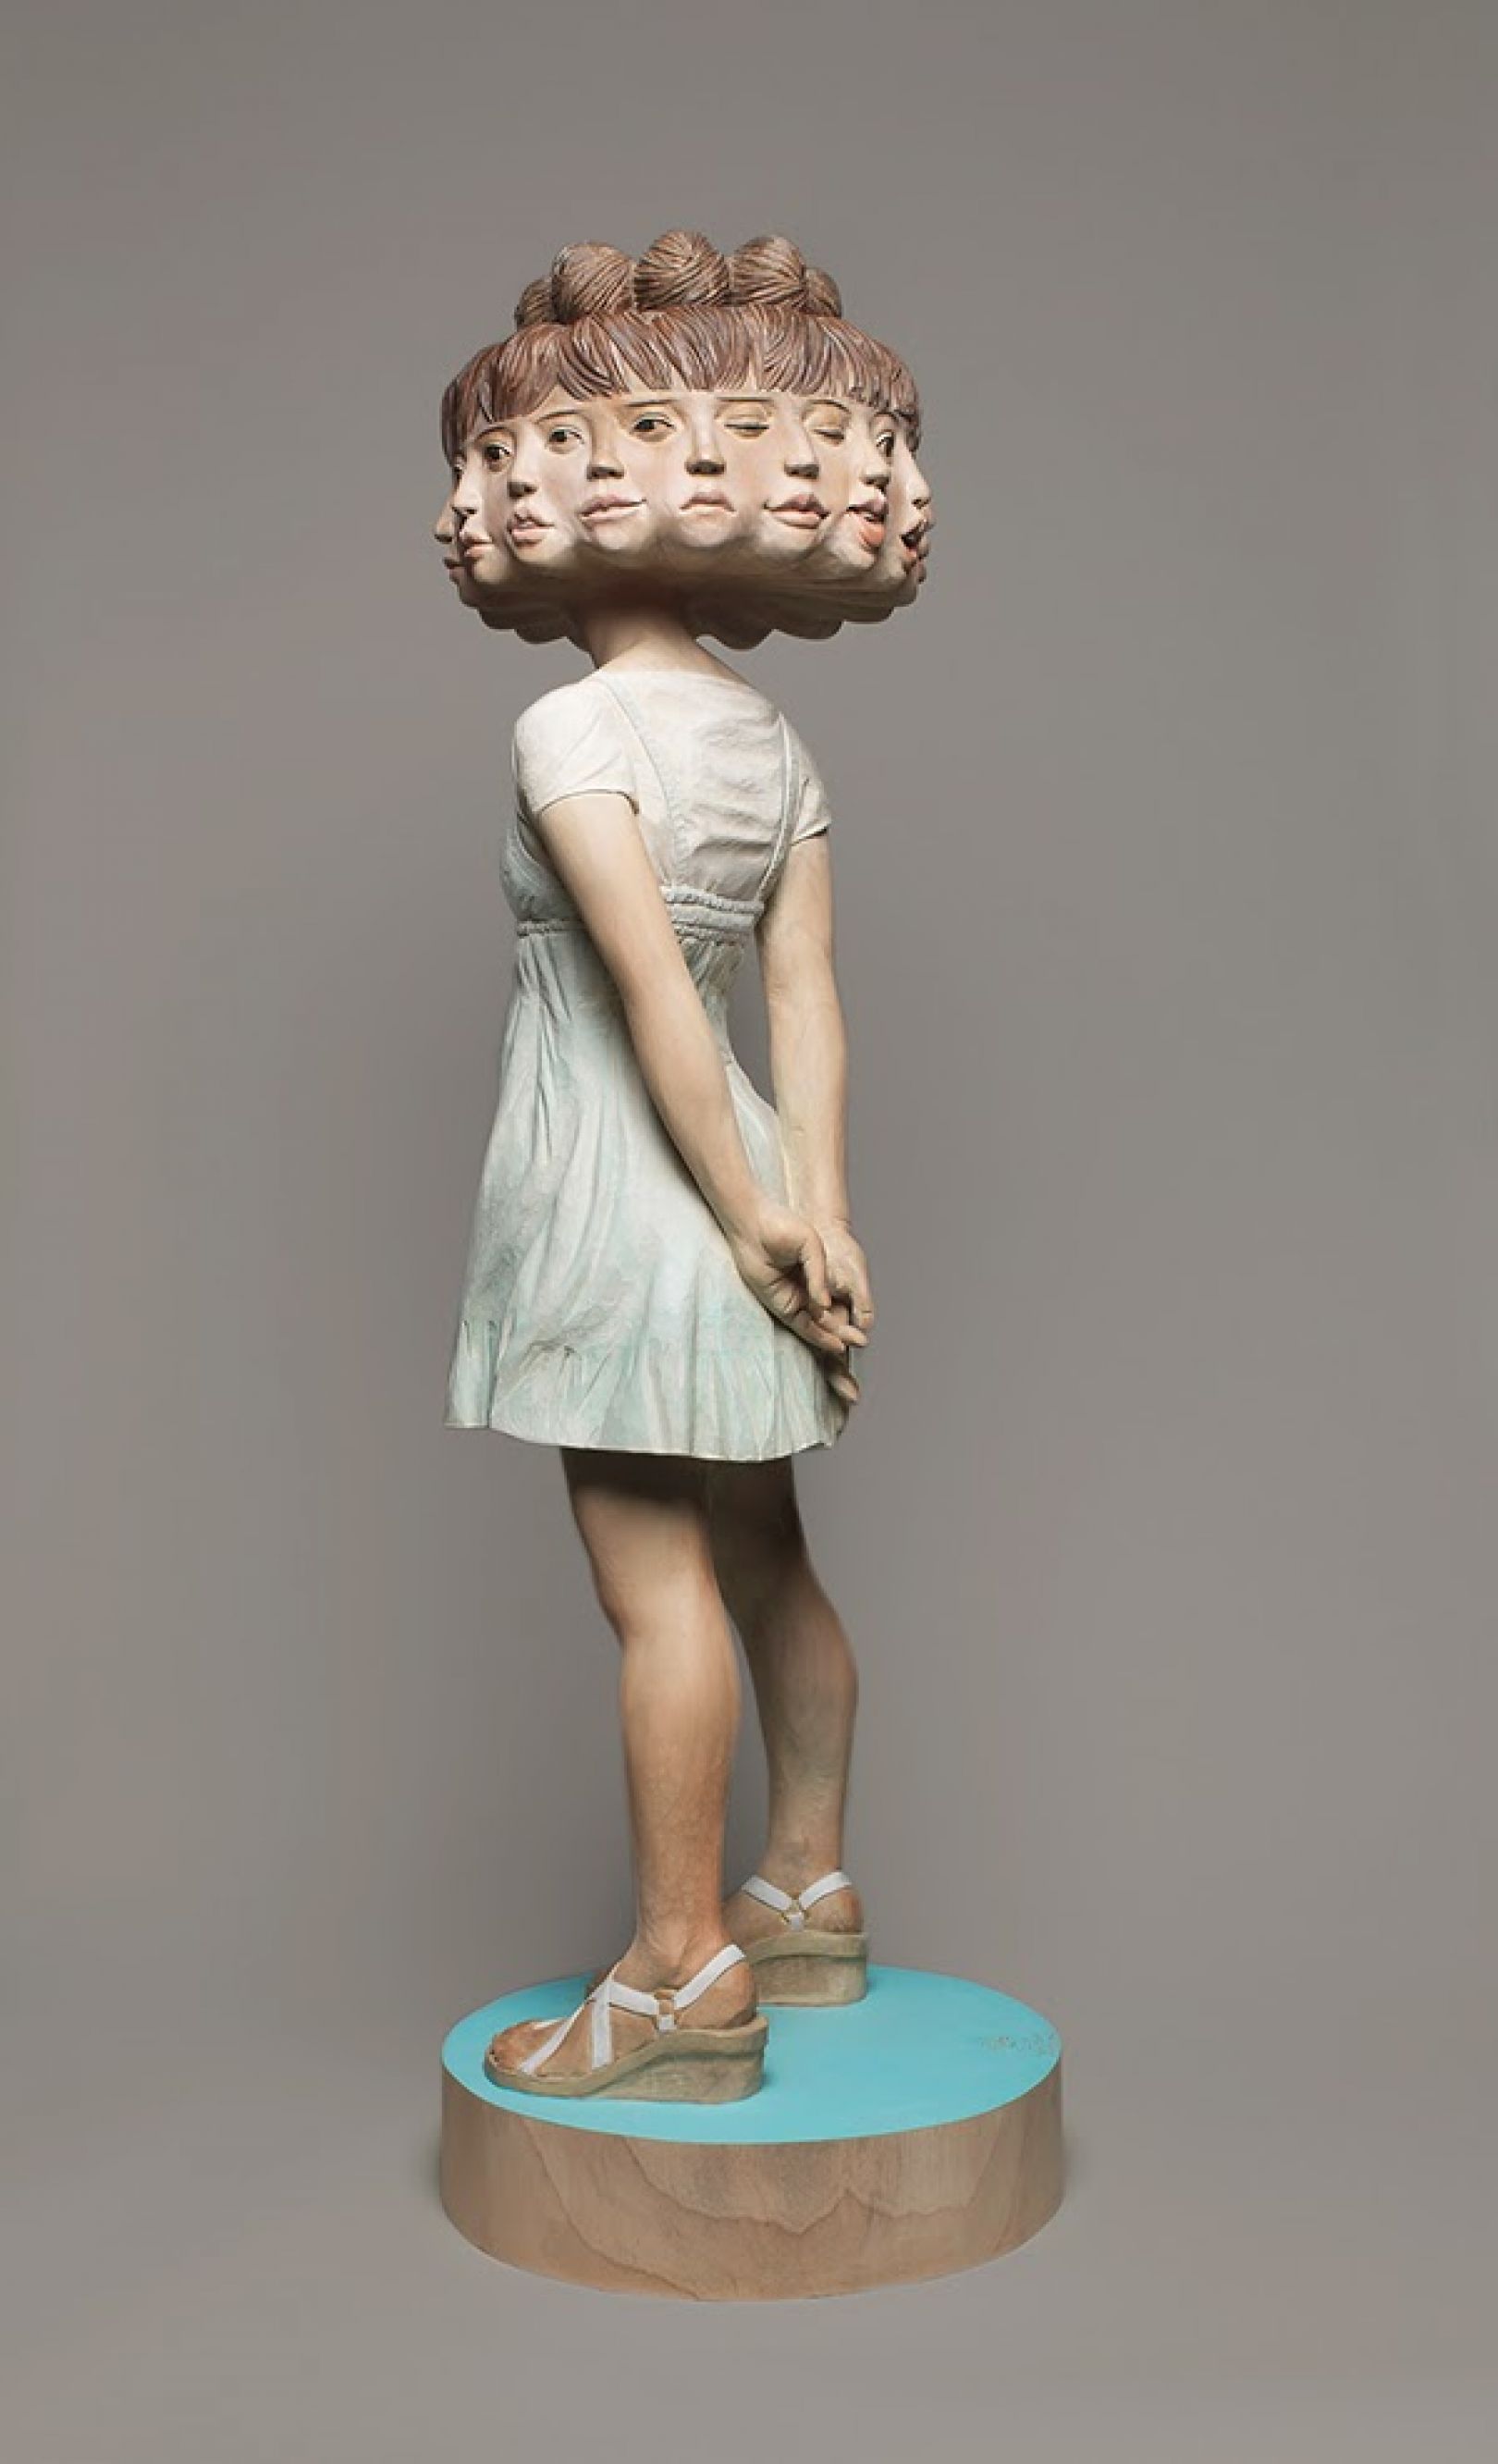 Sculptures of women carved from wooden blocks with glitch effects ...